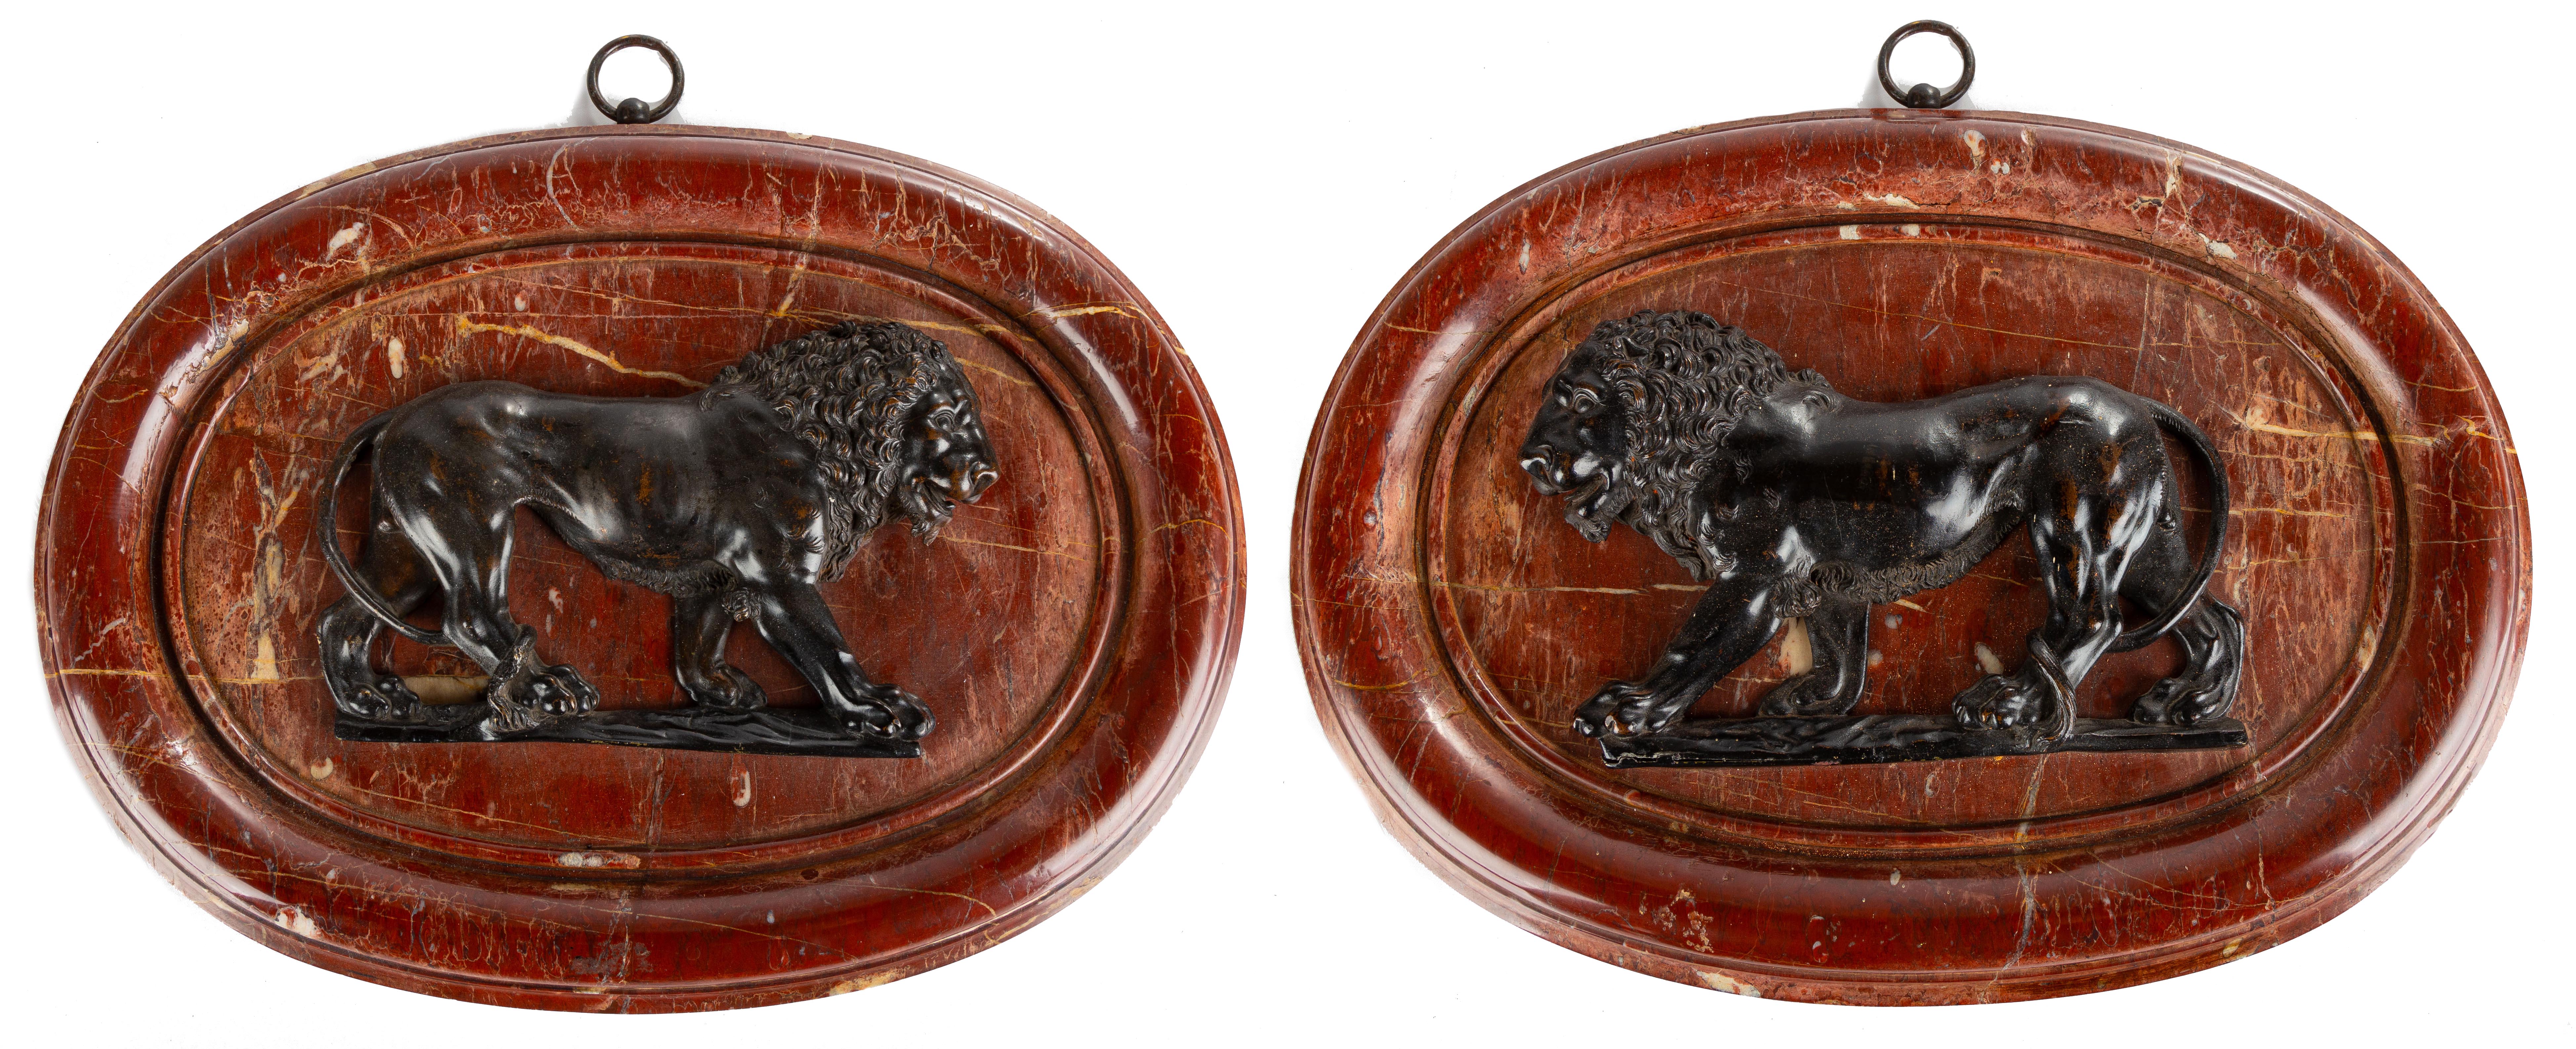 PAIR OF EARLY BRONZE MOUNTED LIONS